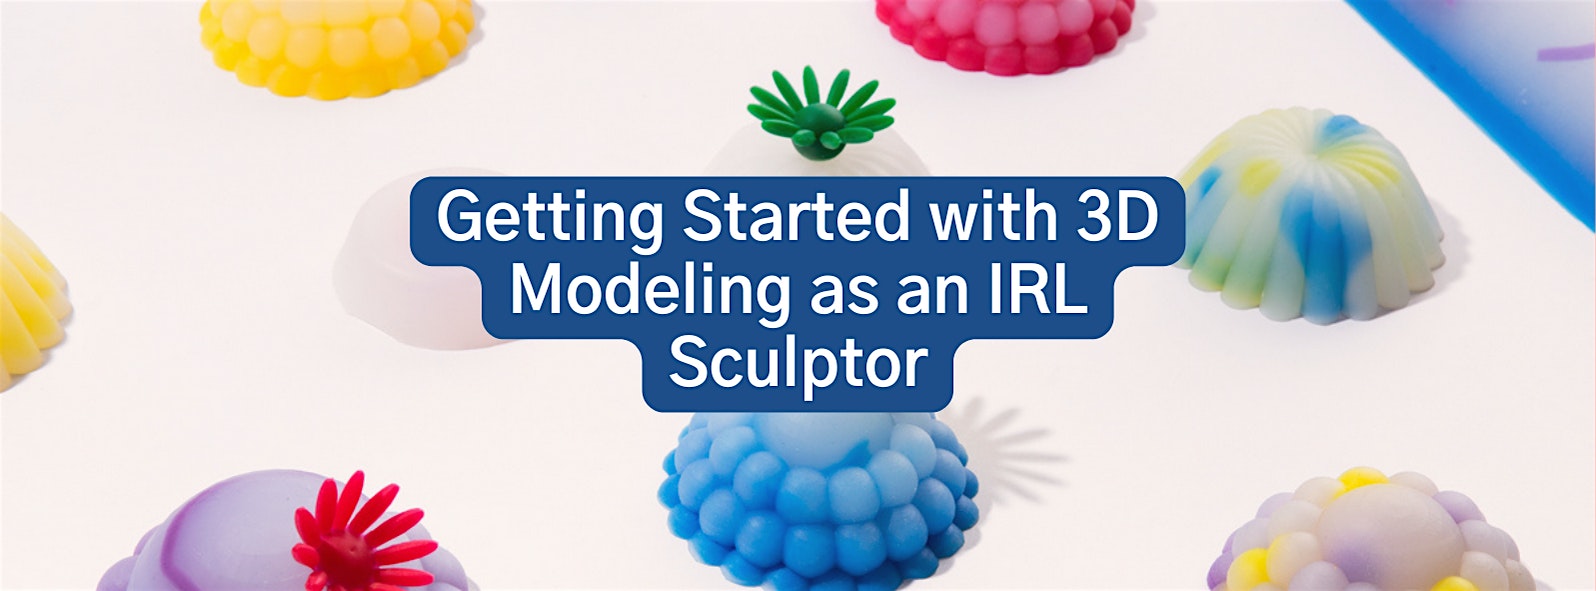 Getting started with 3D Modeling as an IRL Sculptor